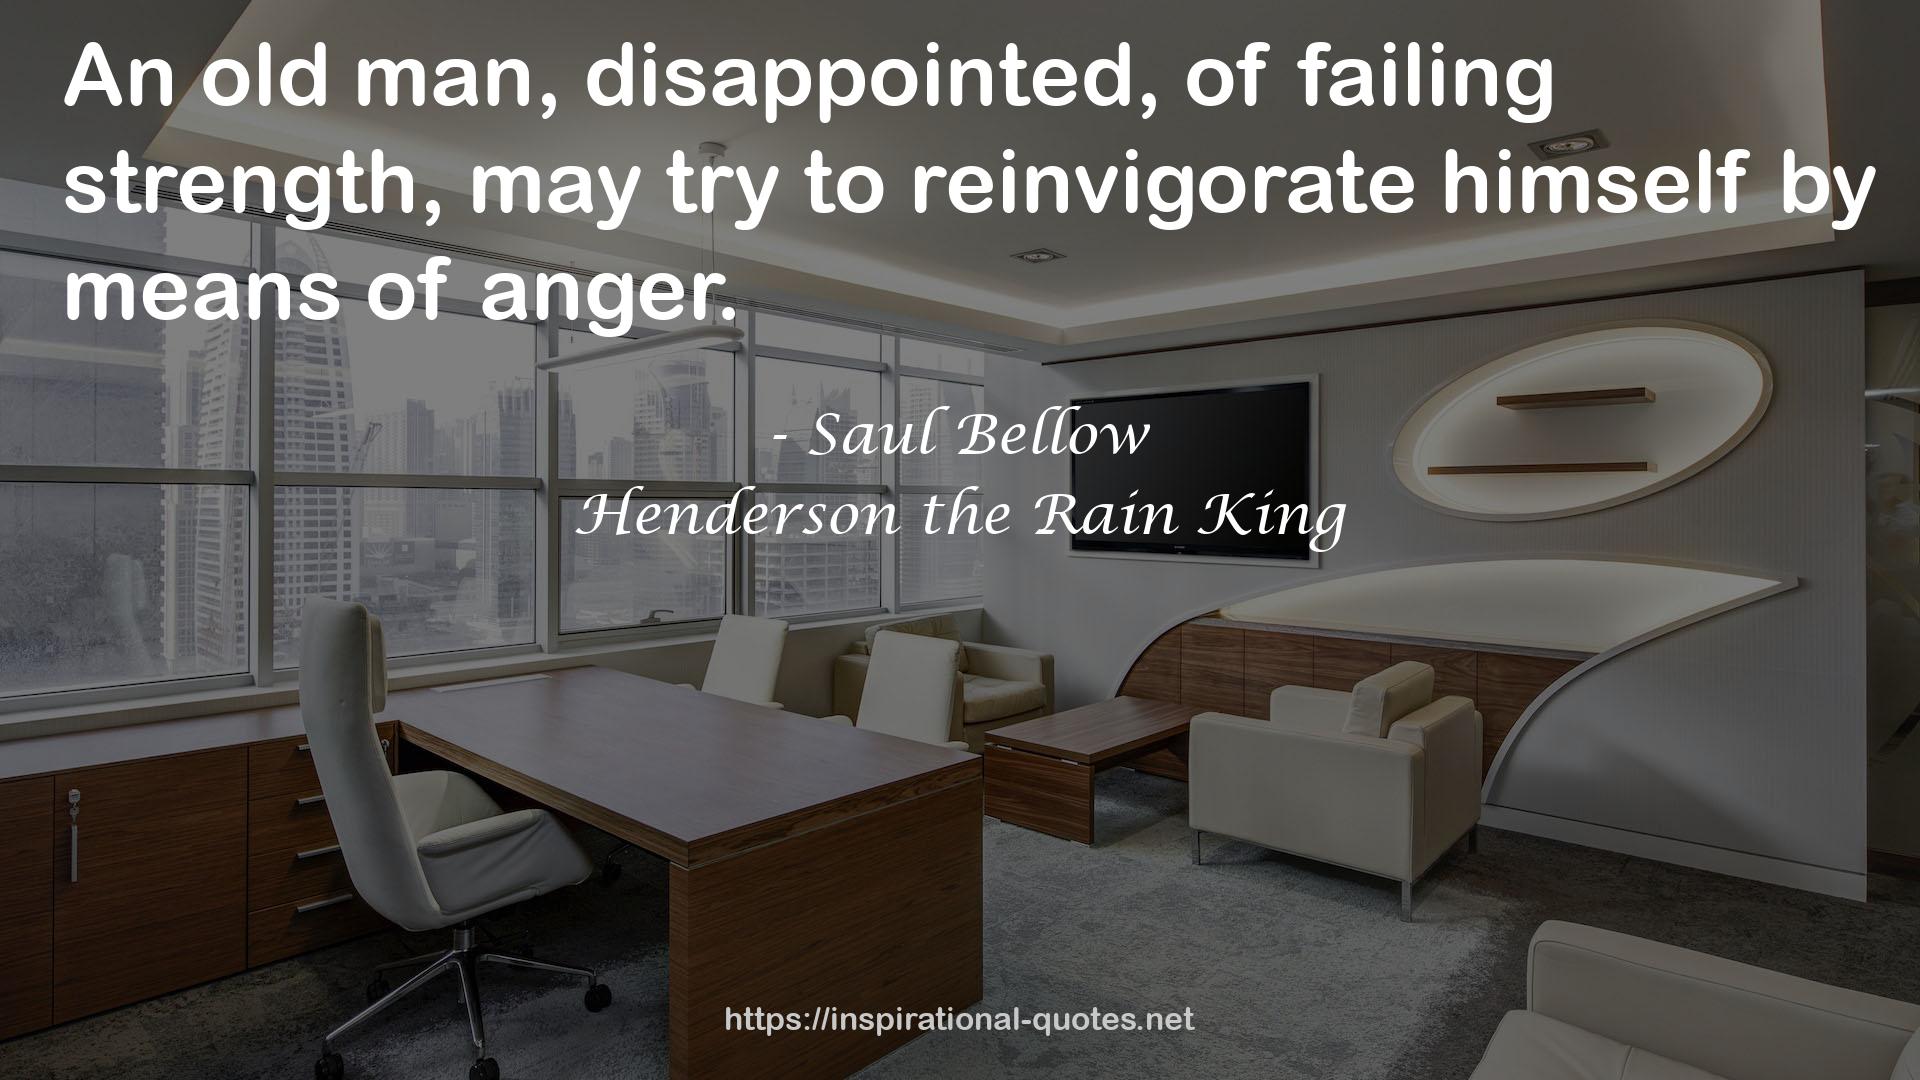 Henderson the Rain King QUOTES